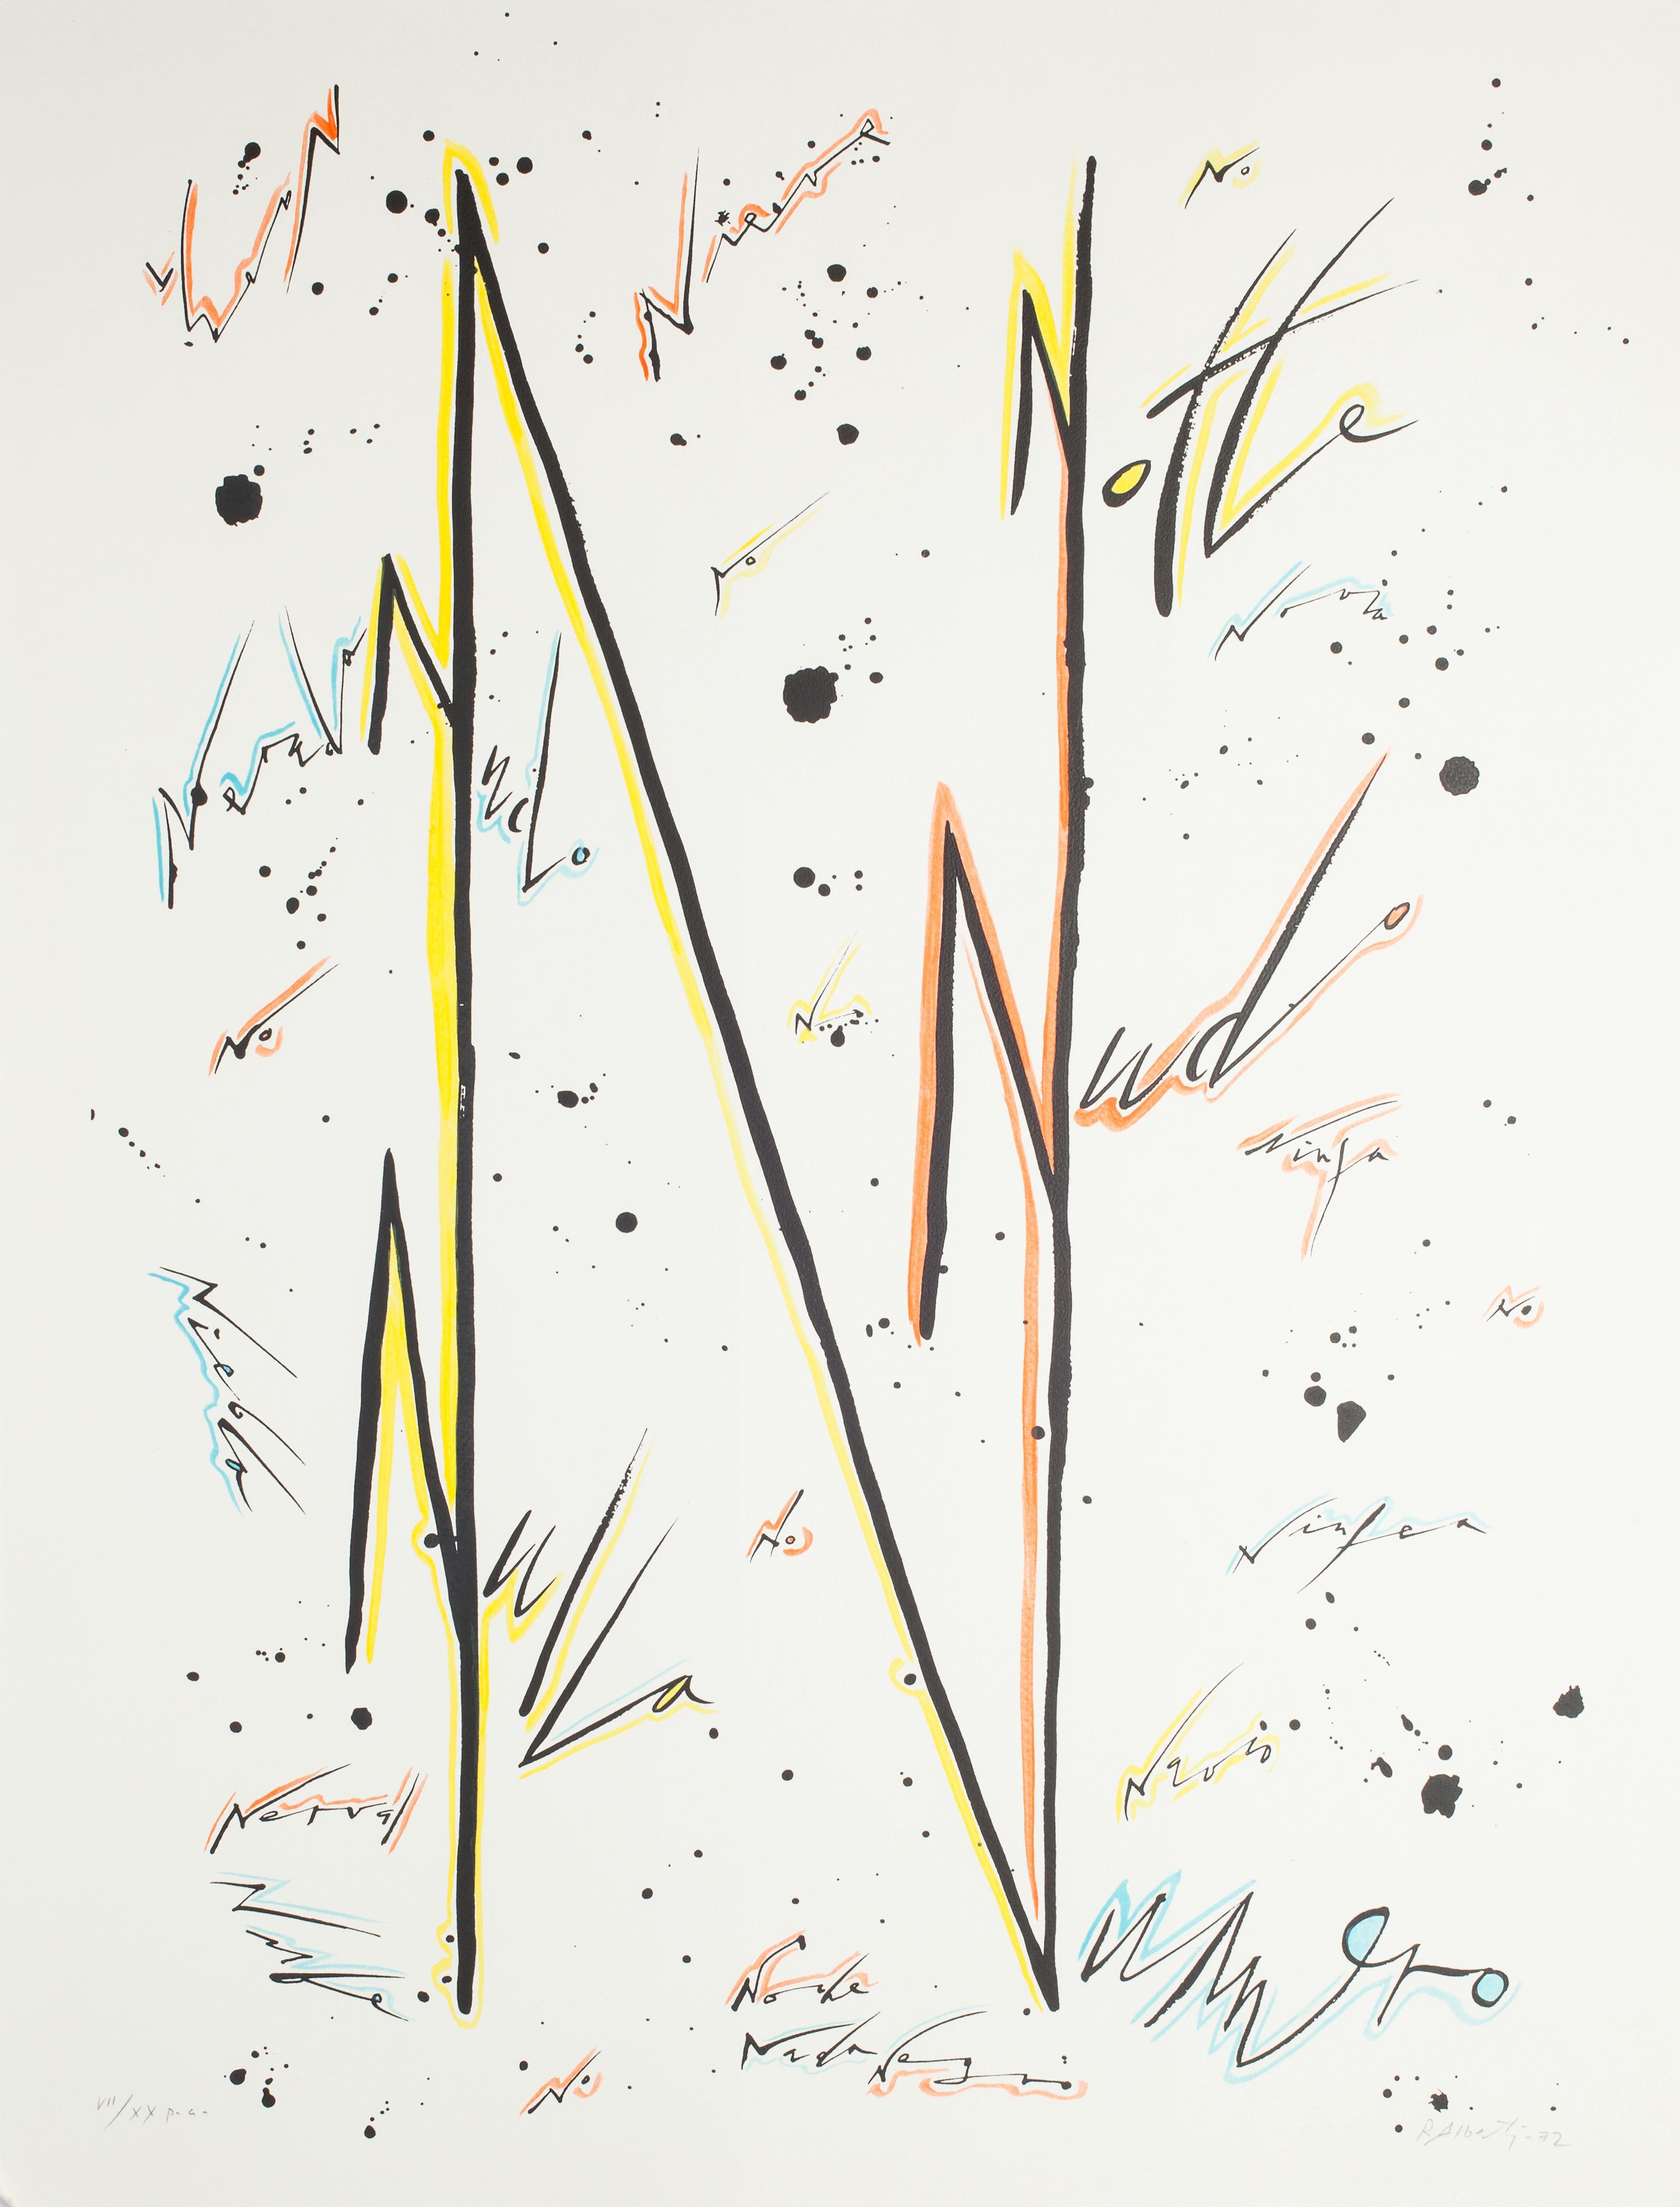 Rafael Alberti Abstract Print - Letter N - Variation - Hand-Colored Lithograph by Raphael Alberti - 1972